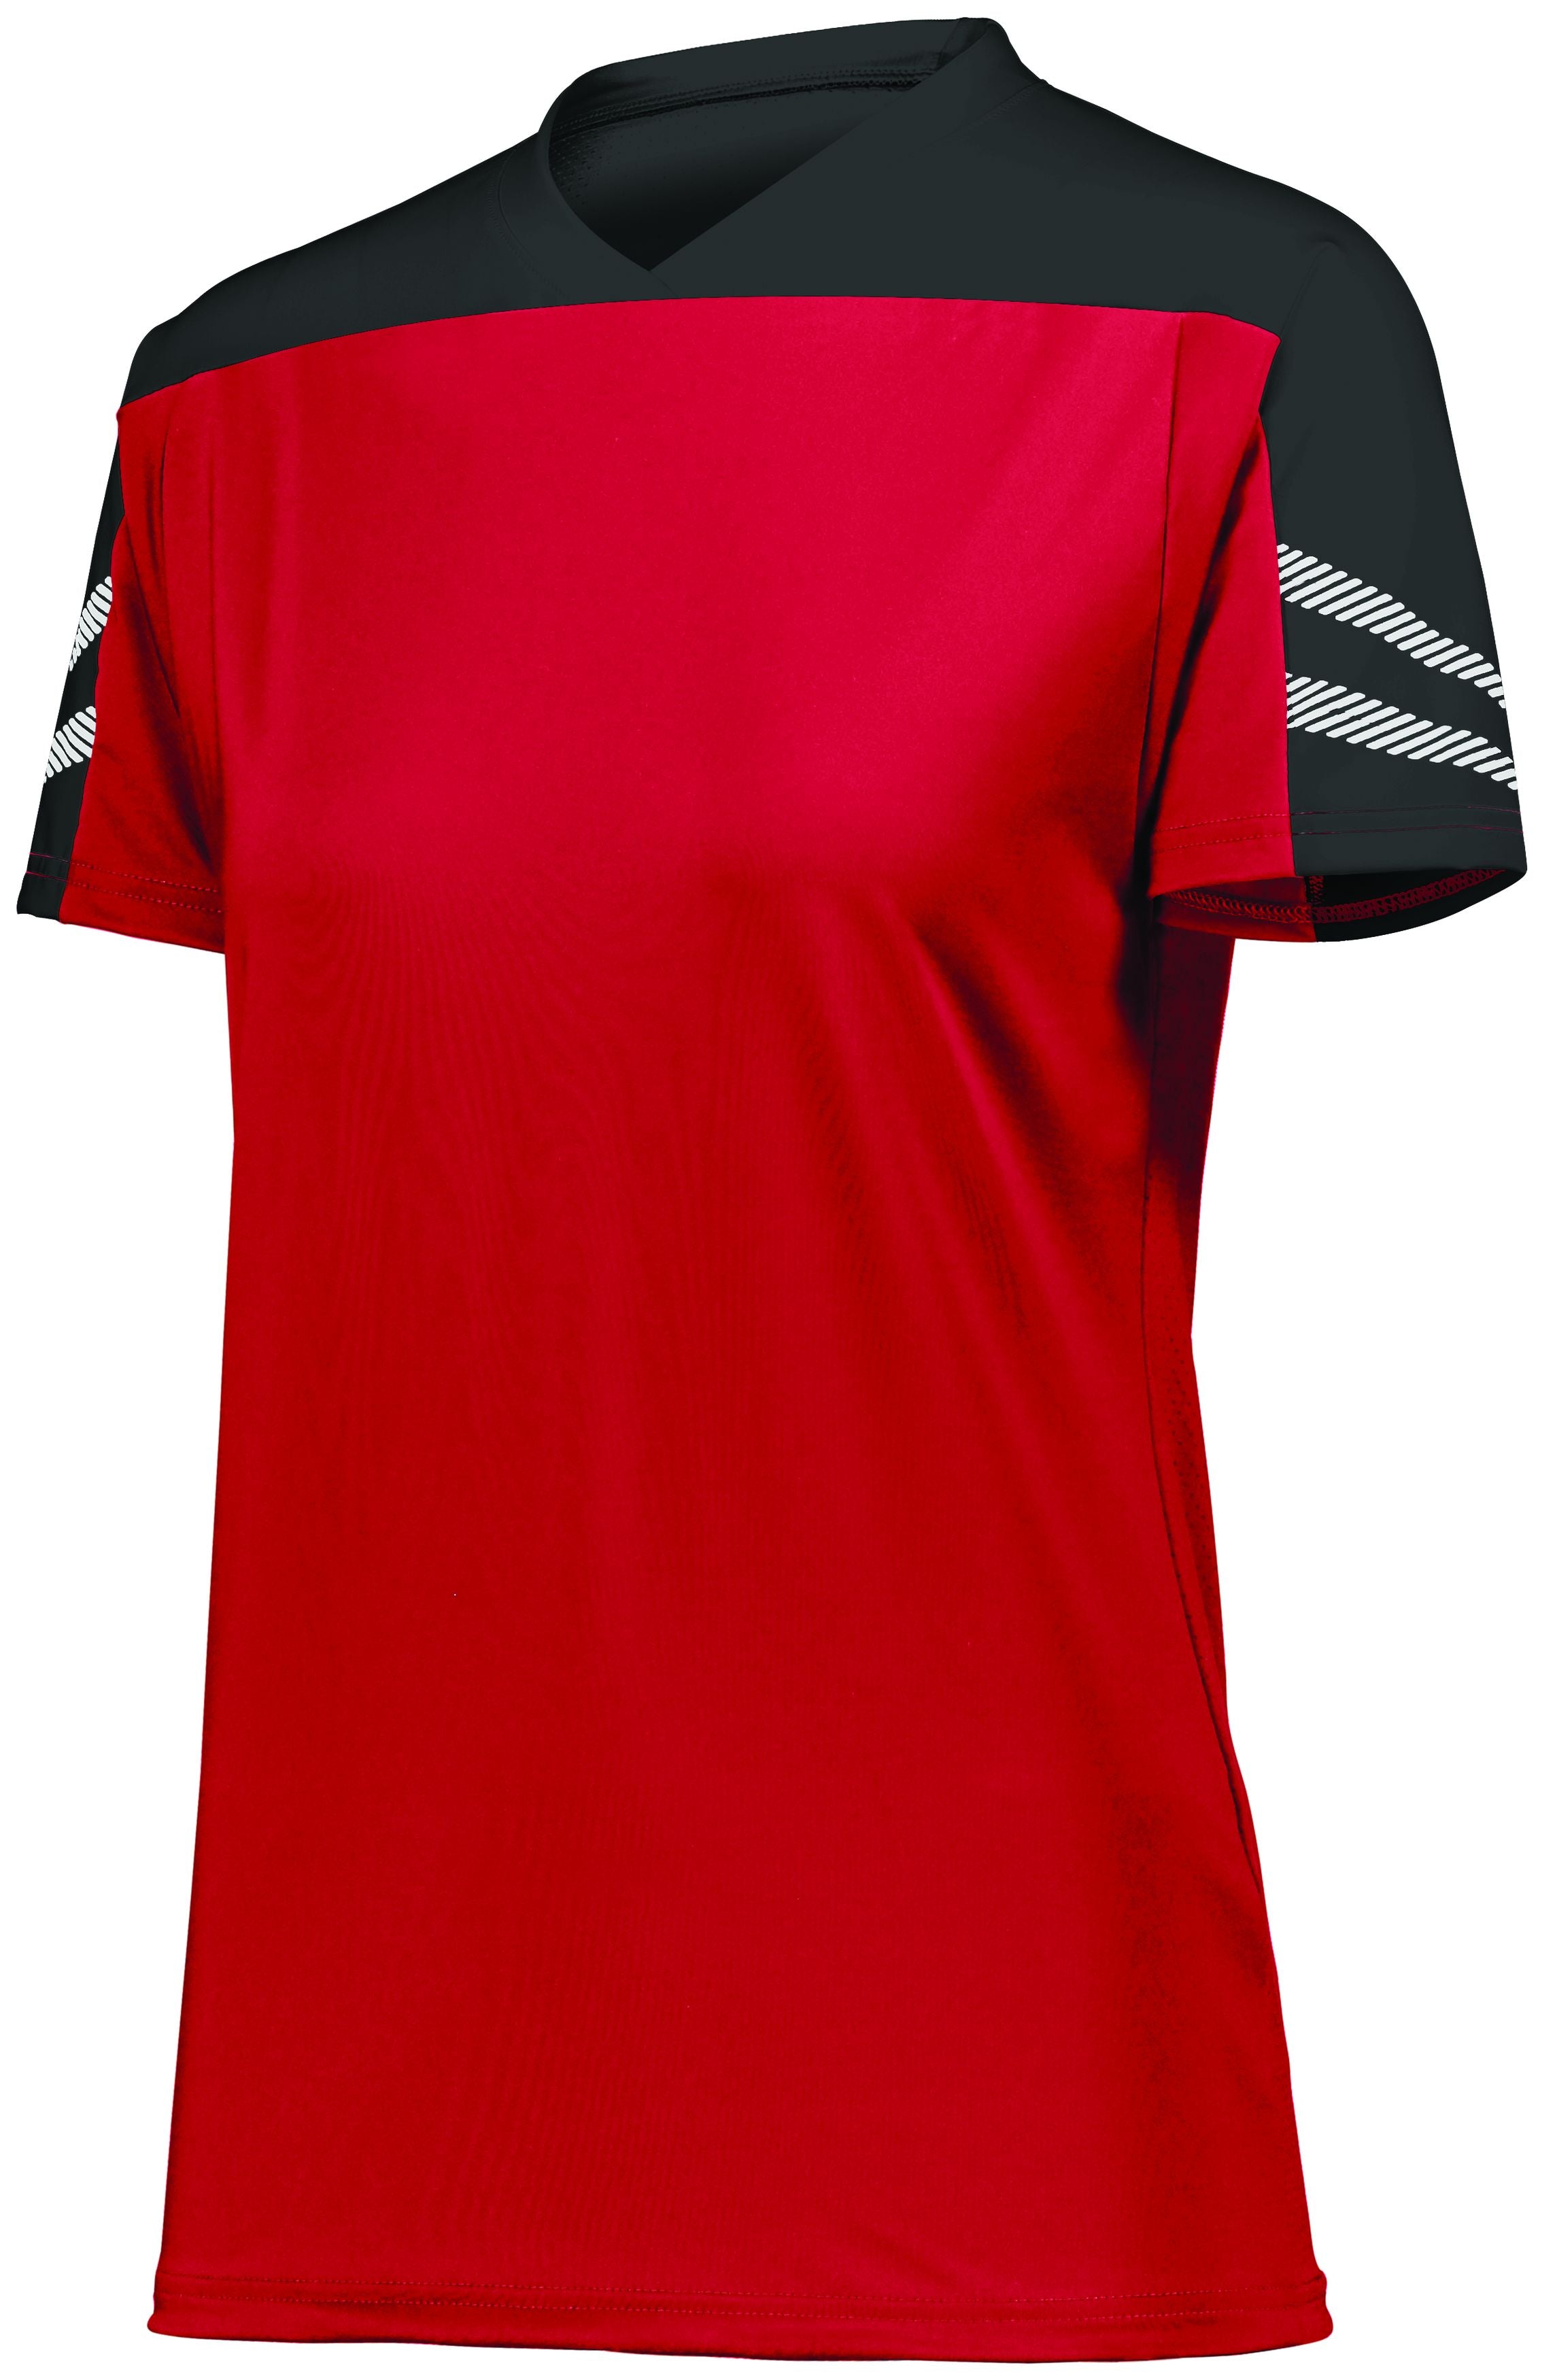 High 5 Ladies Anfield Soccer Jersey in Scarlet/Black/White  -Part of the Ladies, Ladies-Jersey, High5-Products, Soccer, Shirts, All-Sports-1 product lines at KanaleyCreations.com